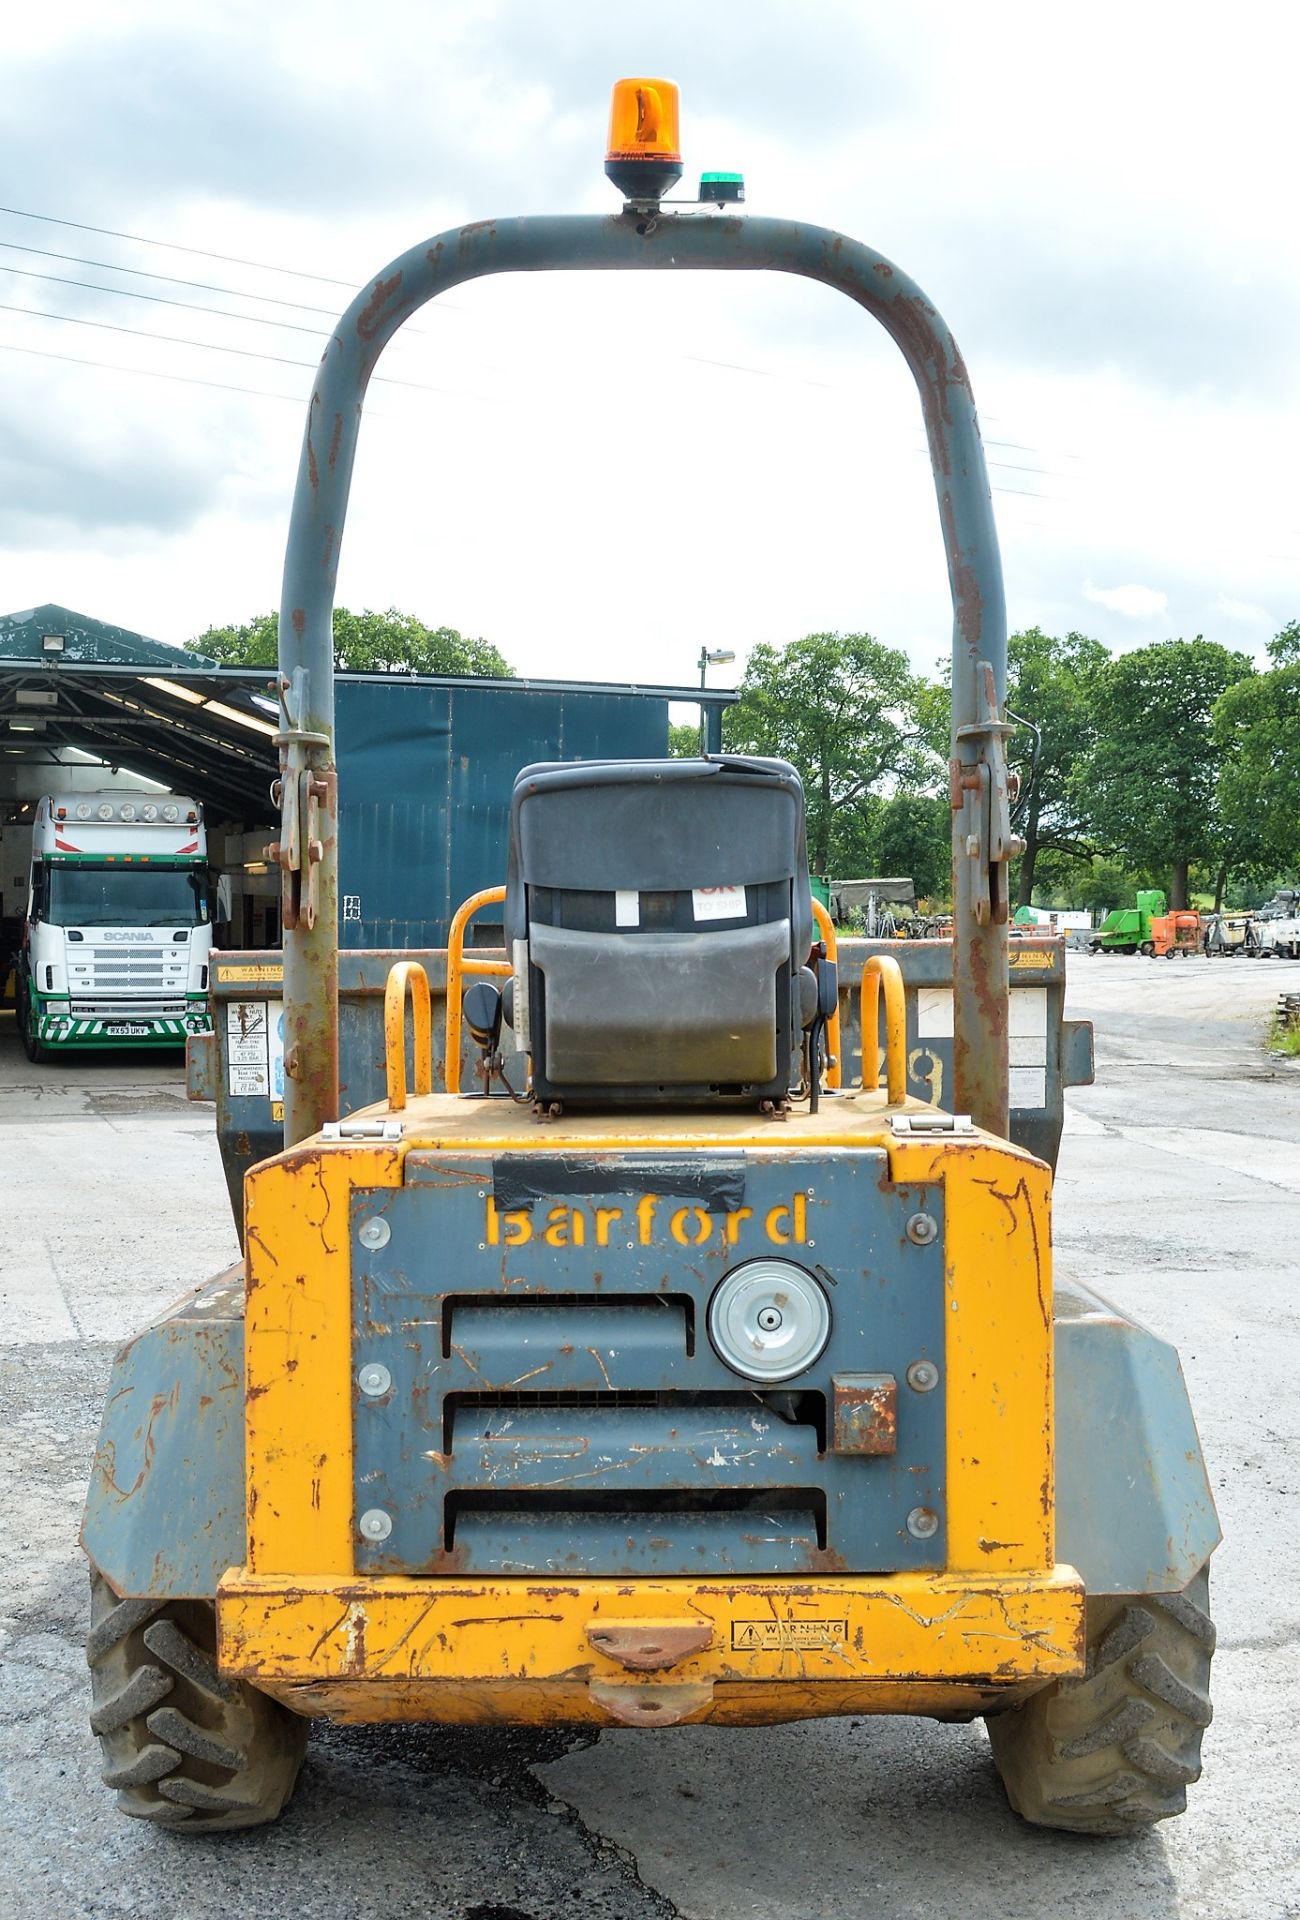 Barford 3 tonne straight skip dumper Year: 2006 S/N: SBTH0815 Recorded Hours: Not displayed (Clock - Image 6 of 11